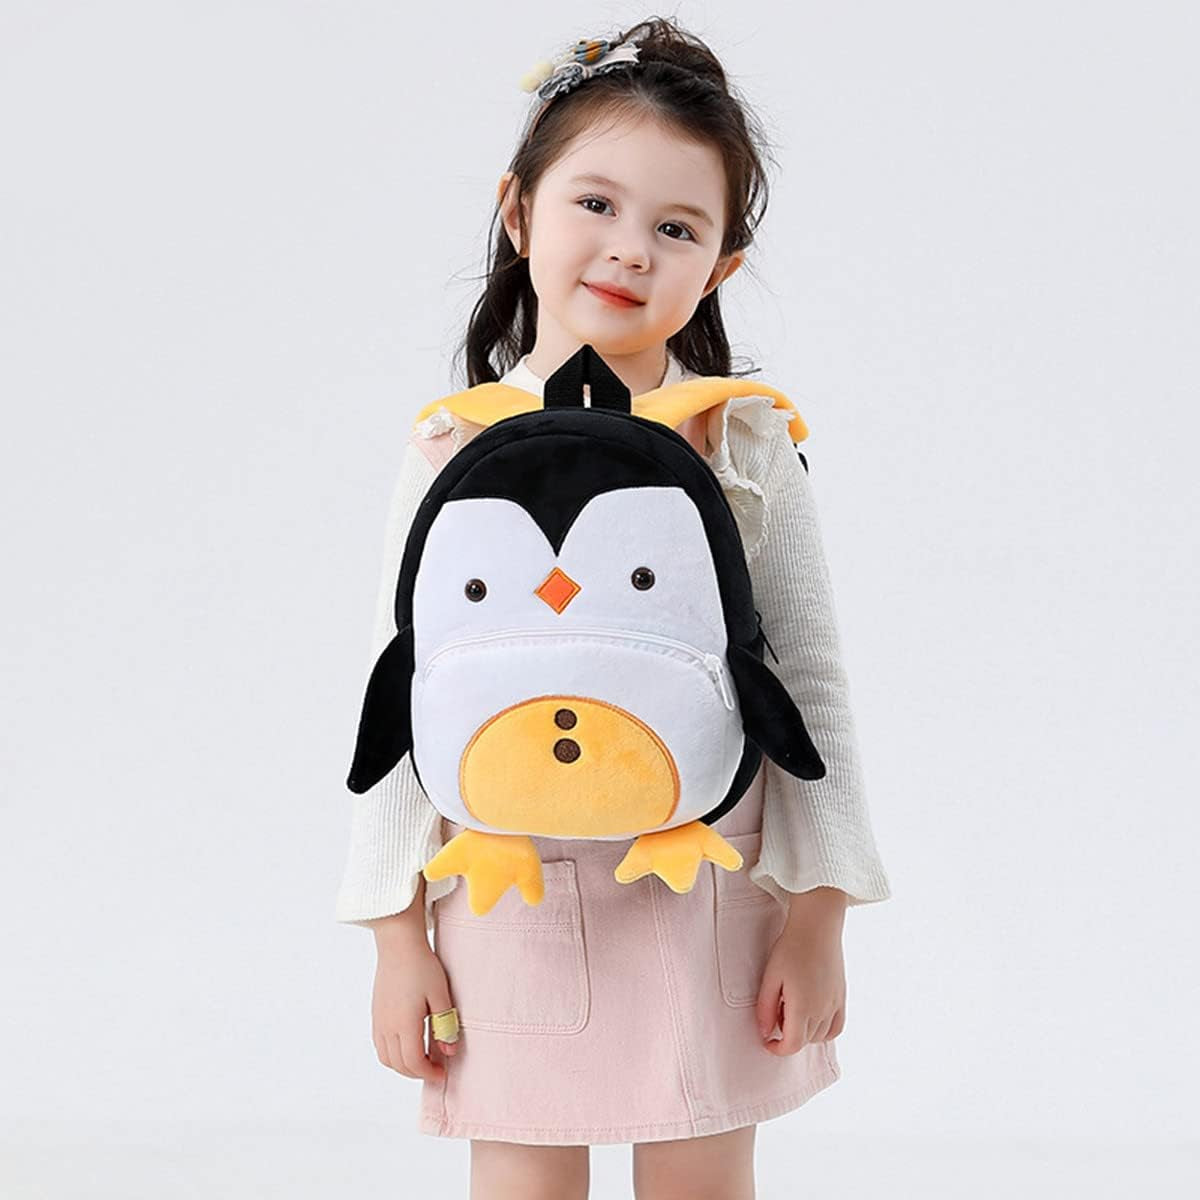 Toddler Backpack for Boys and Girls, Cute Soft Plush Animal Cartoon Mini Backpack Little for Kids 2-6 Years (Bunny)